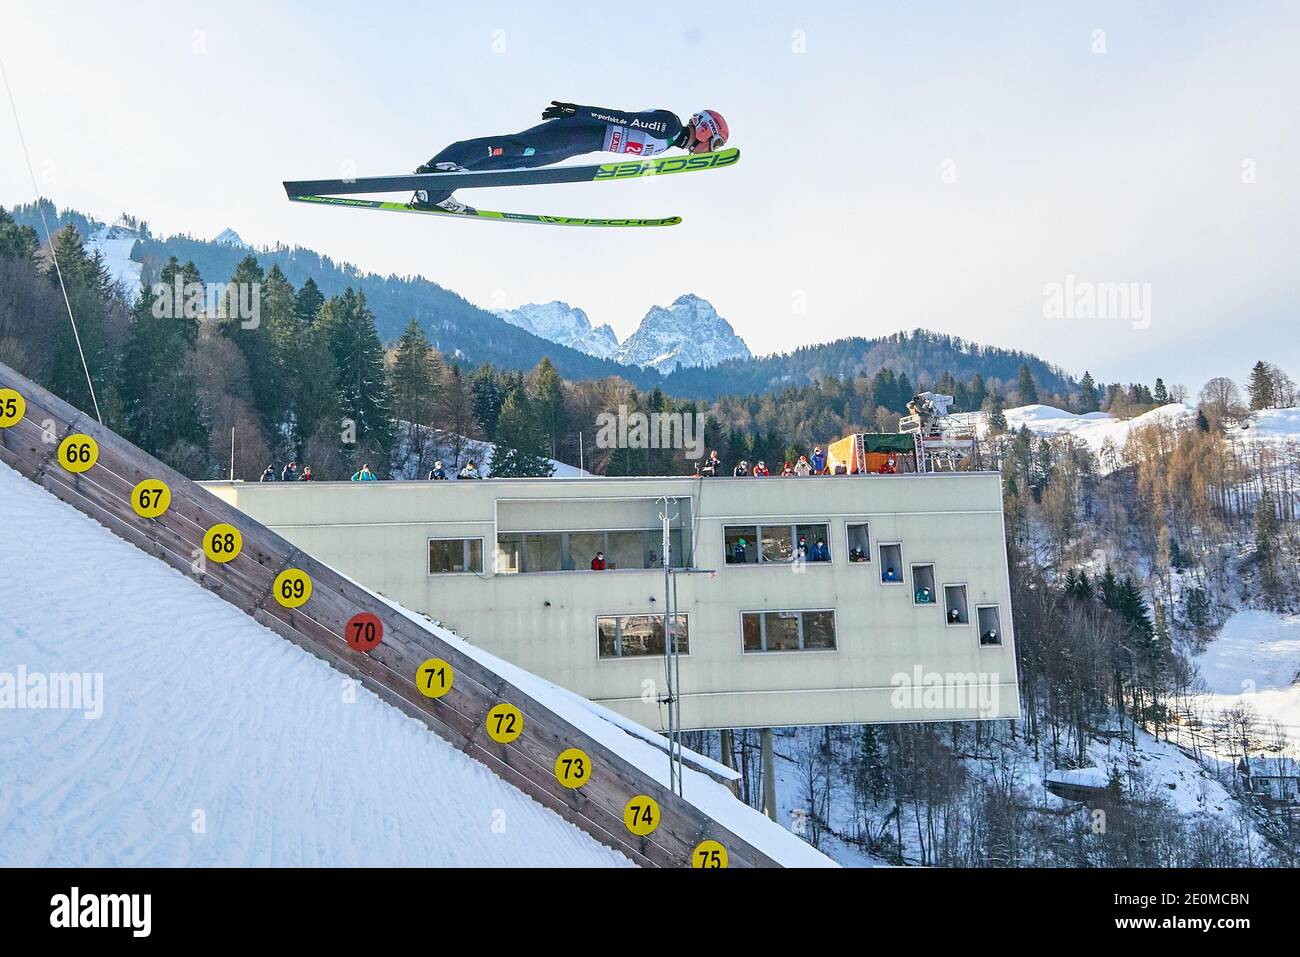 Severin FREUND, GER in action  in front of Zugspitze mountain at the Four Hills Tournament Ski Jumping at Olympic Stadium, Grosse Olympiaschanze in Garmisch-Partenkirchen, Bavaria, Germany, January 01, 2021.  © Peter Schatz / Alamy Live News Stock Photo